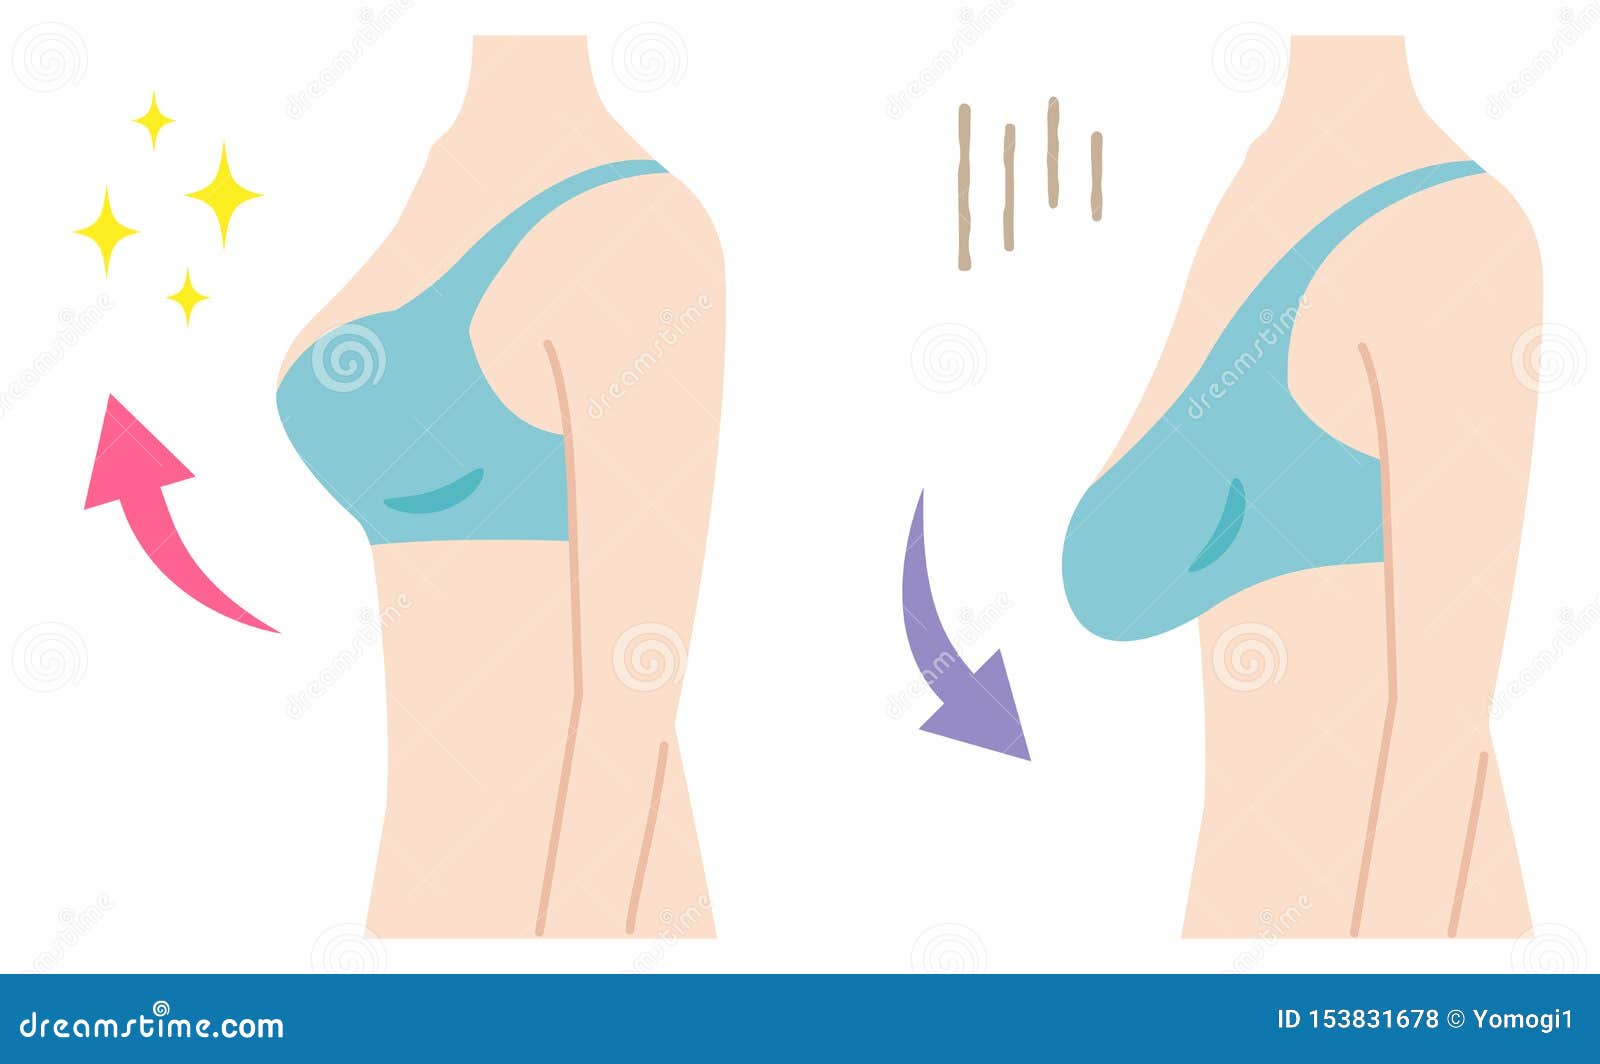 Firm and Sagging Breasts Illustration. Womenâ€™s Beauty Body Care Concept  Stock Vector - Illustration of femininity, breast: 153831678